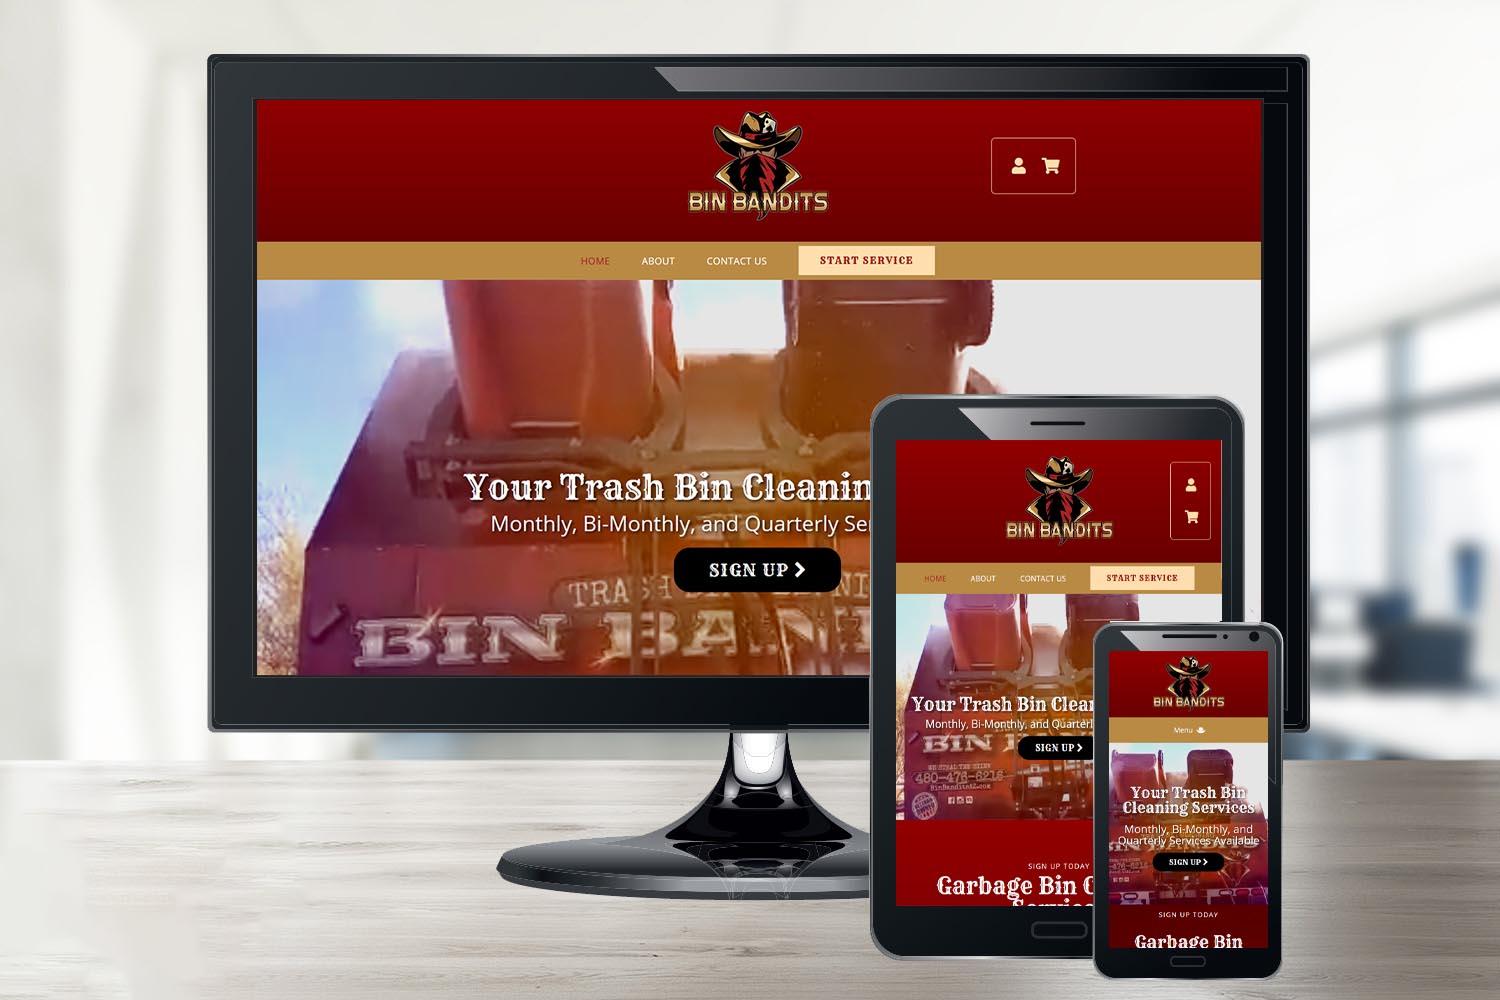 Bin Bandits website shown on different devices